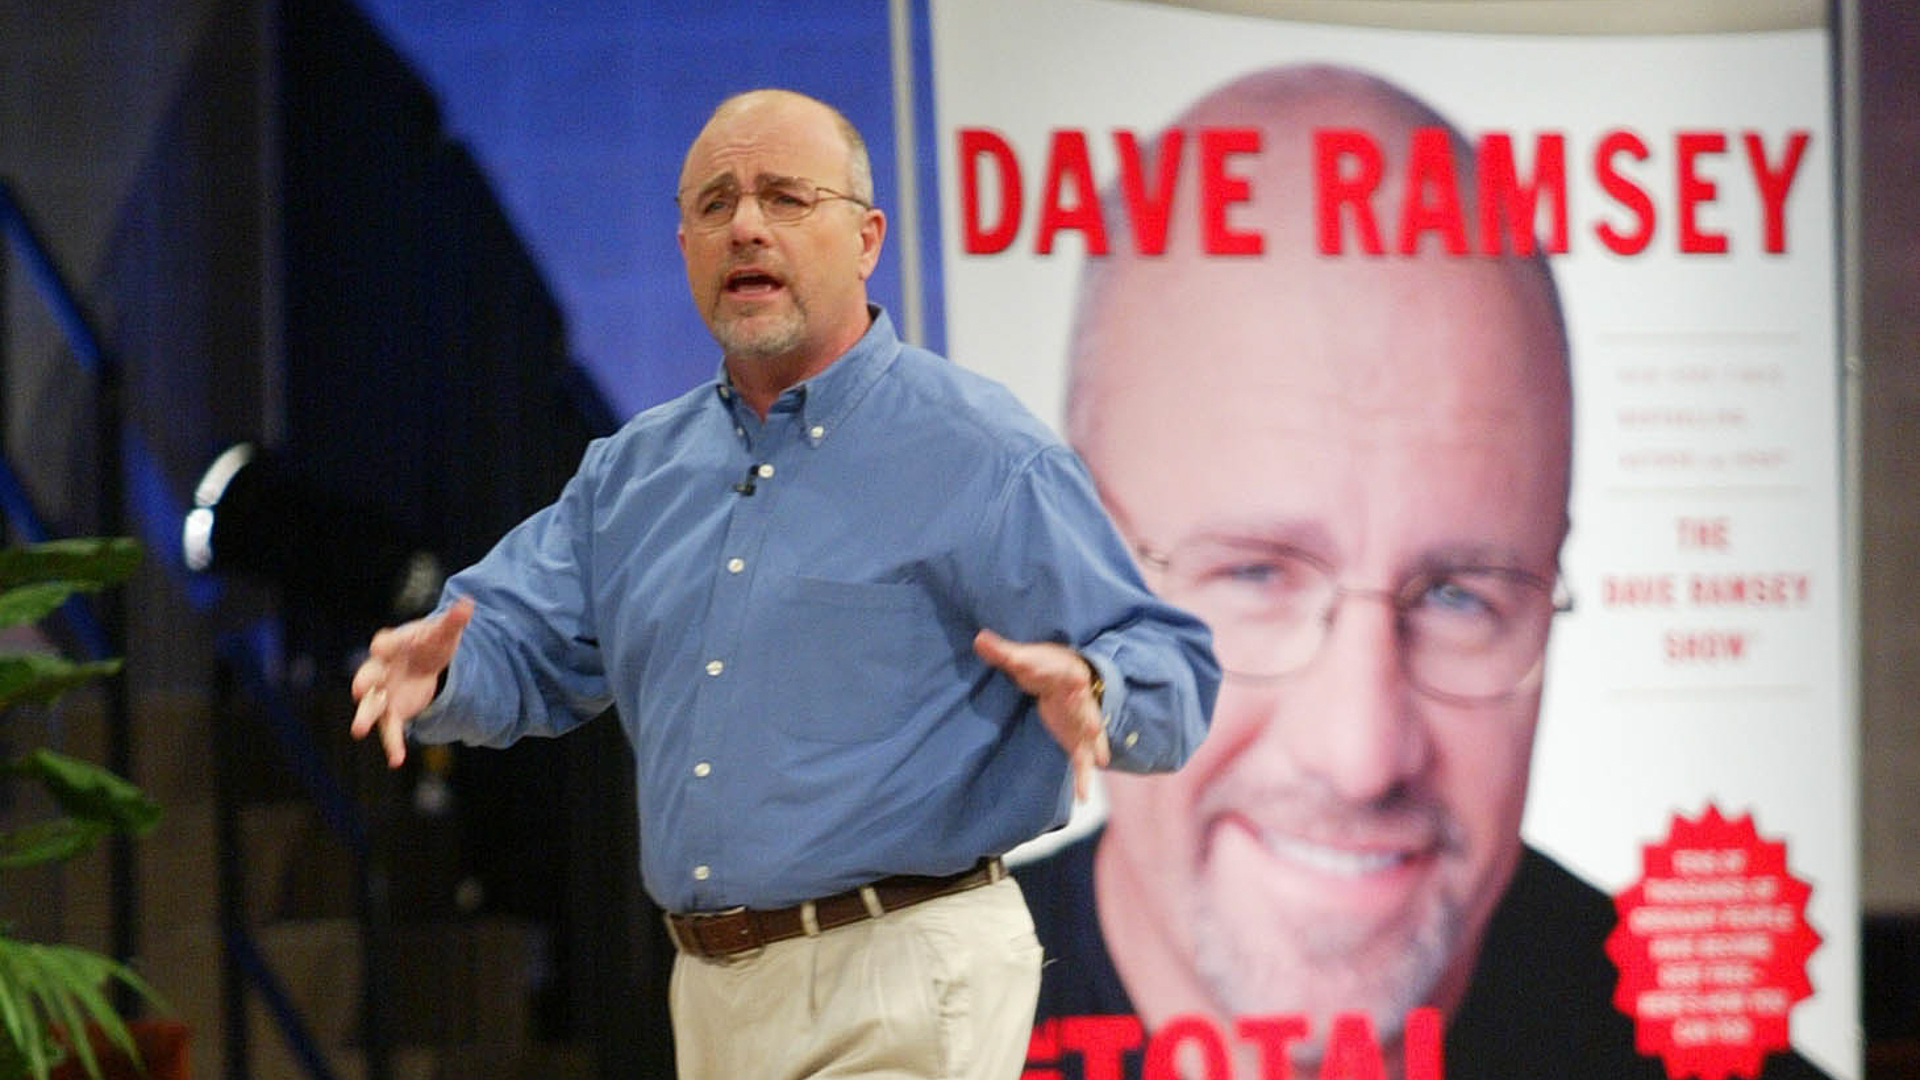 5 Dave Ramsey Finance Tips To Earn More Money This Year